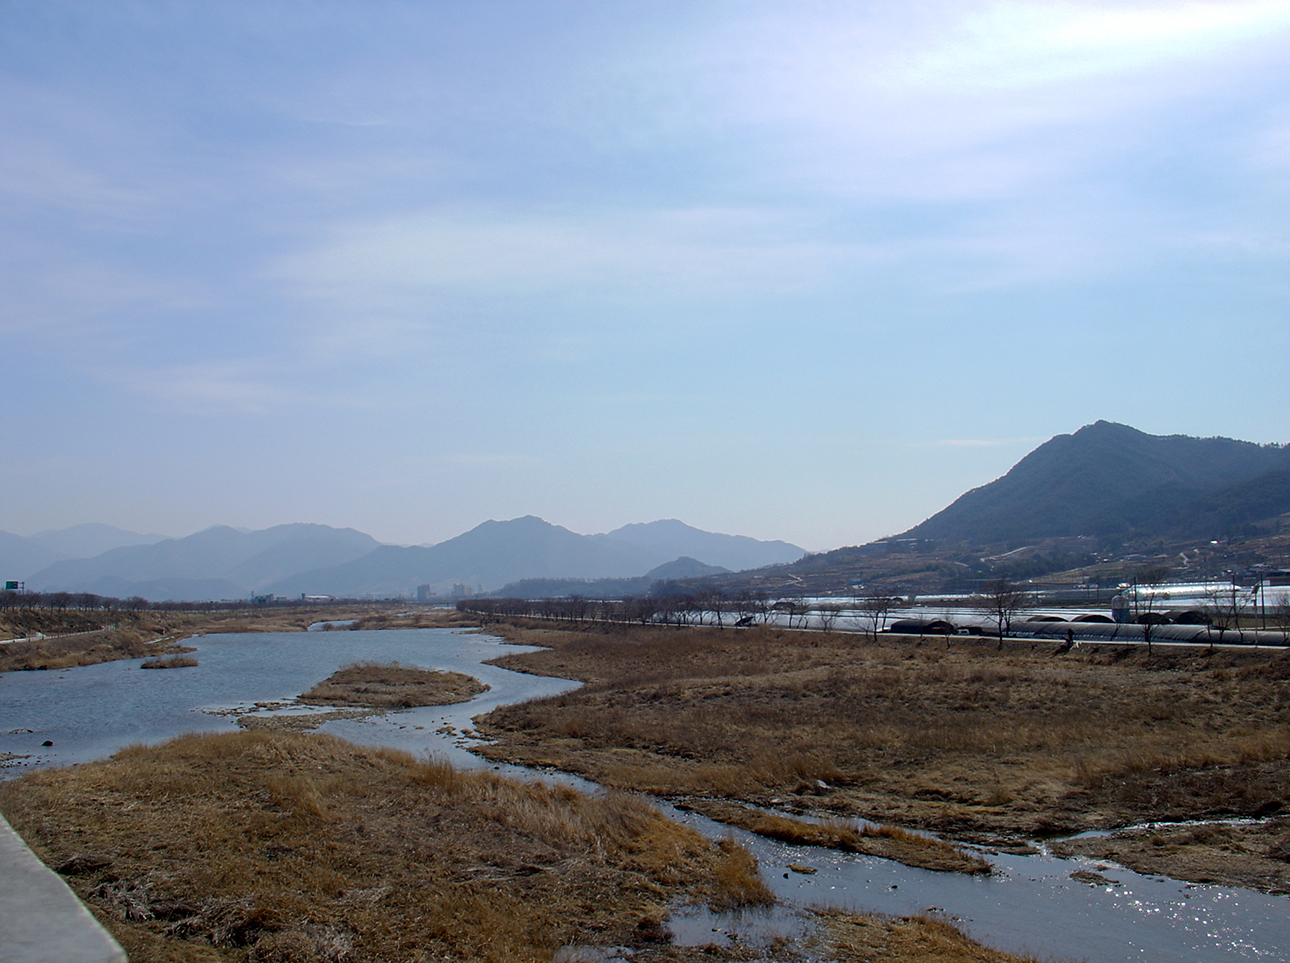 The river next to the road in Gurye County (구례)